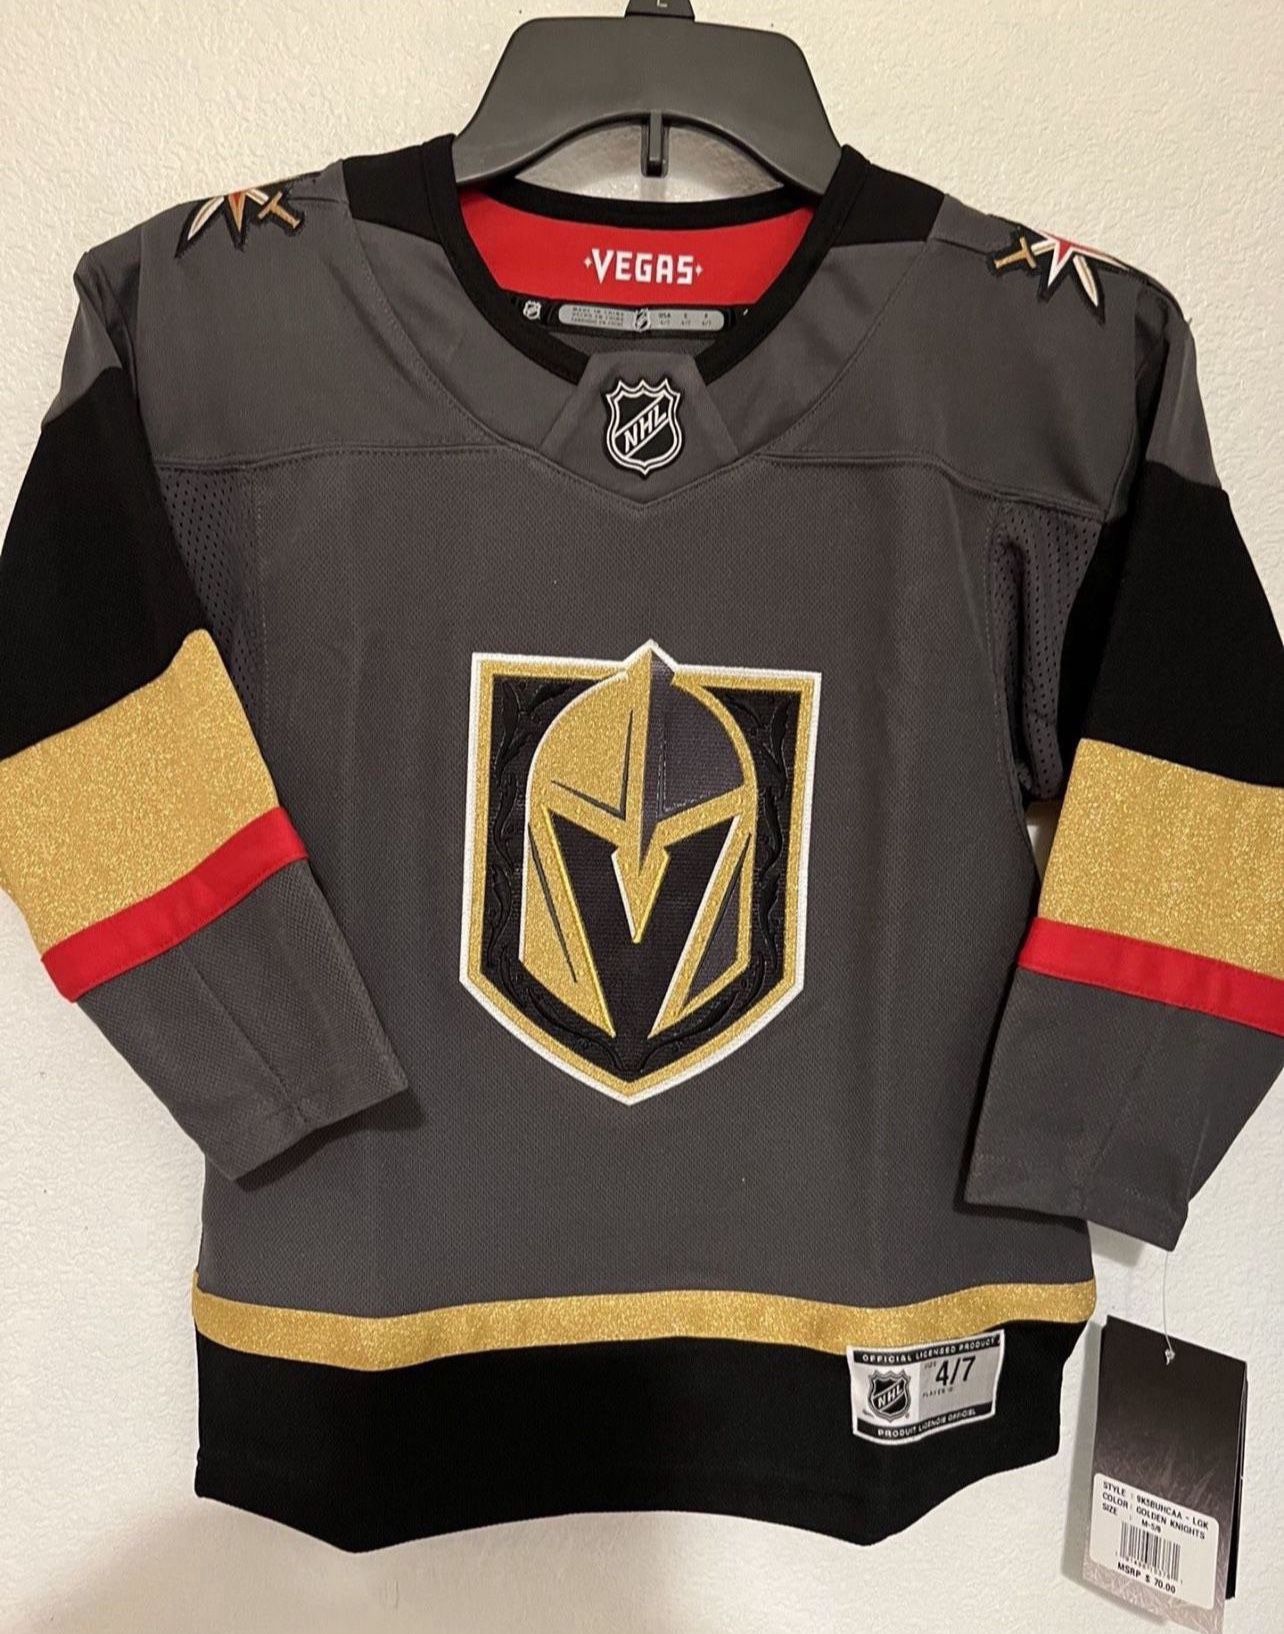 Vegas Golden Knights Jersey for Sale in North Las Vegas, NV